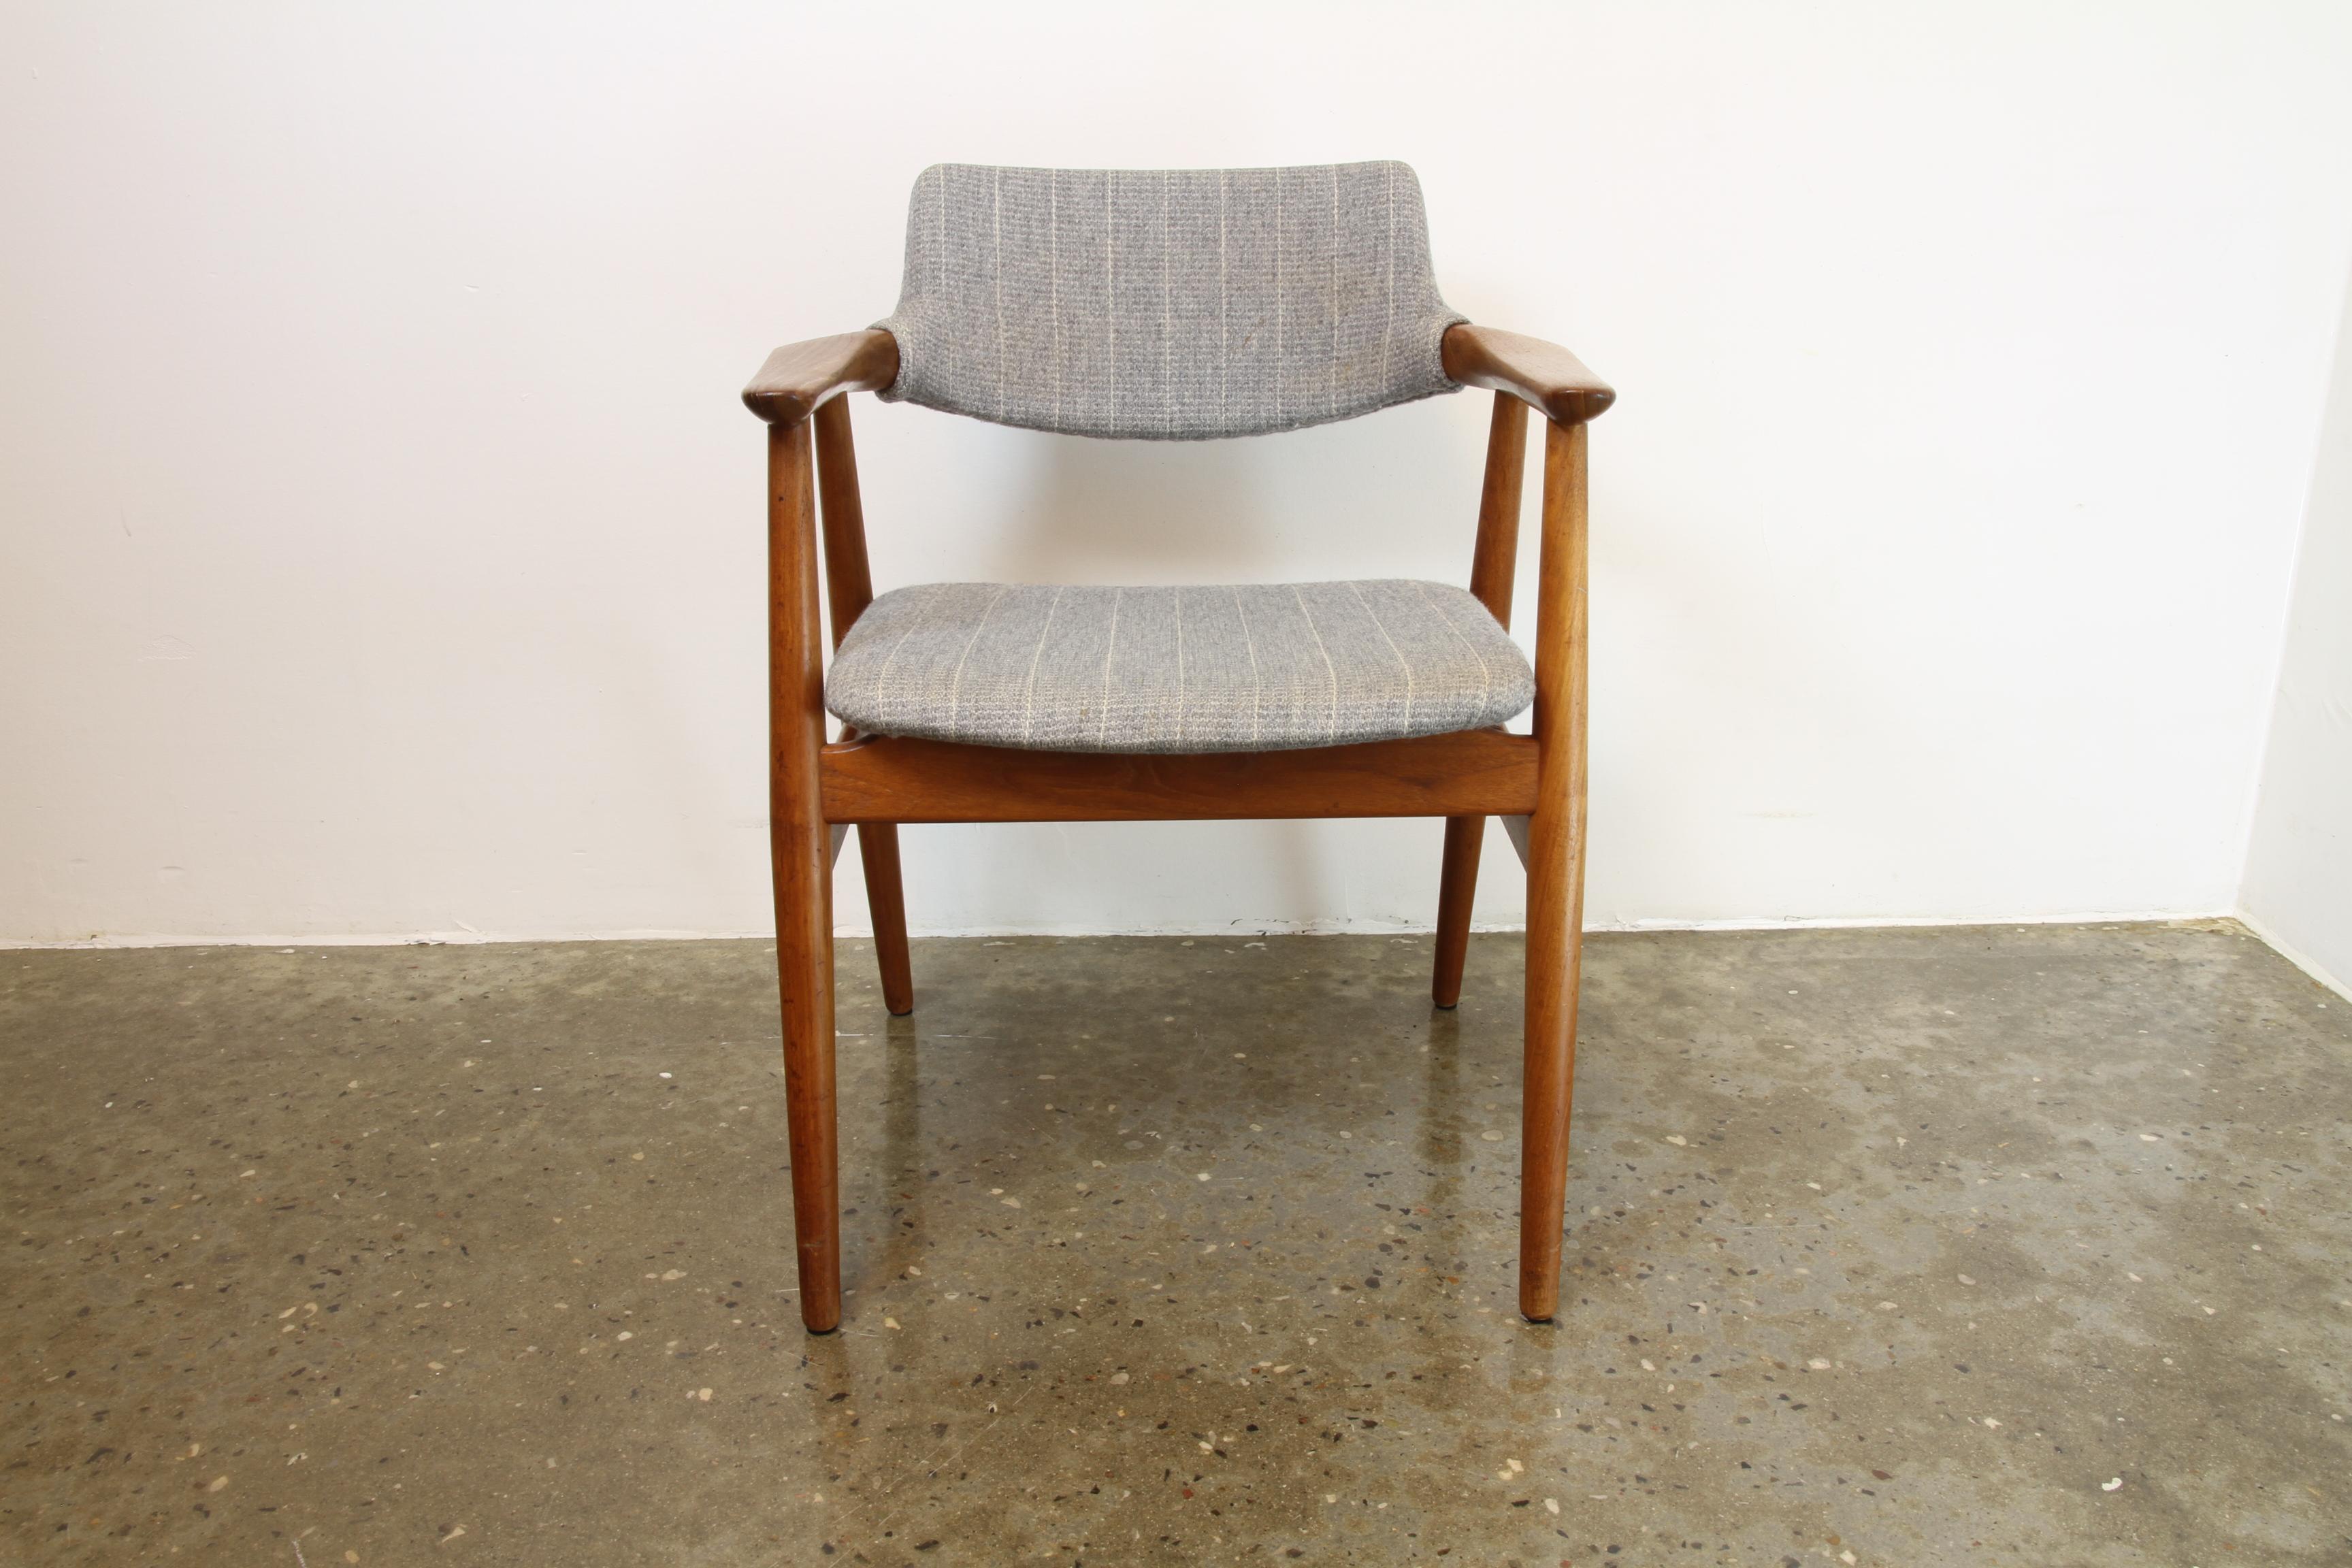 Very elegant and comfortable teak armchair by Danish designer Svend Aage Eriksen made in the 1960s by Glostrup Møbelfabrik. Designed in 1962. Solid sculpted teak and grey wool. Perfect for the vintage style homeoffice.